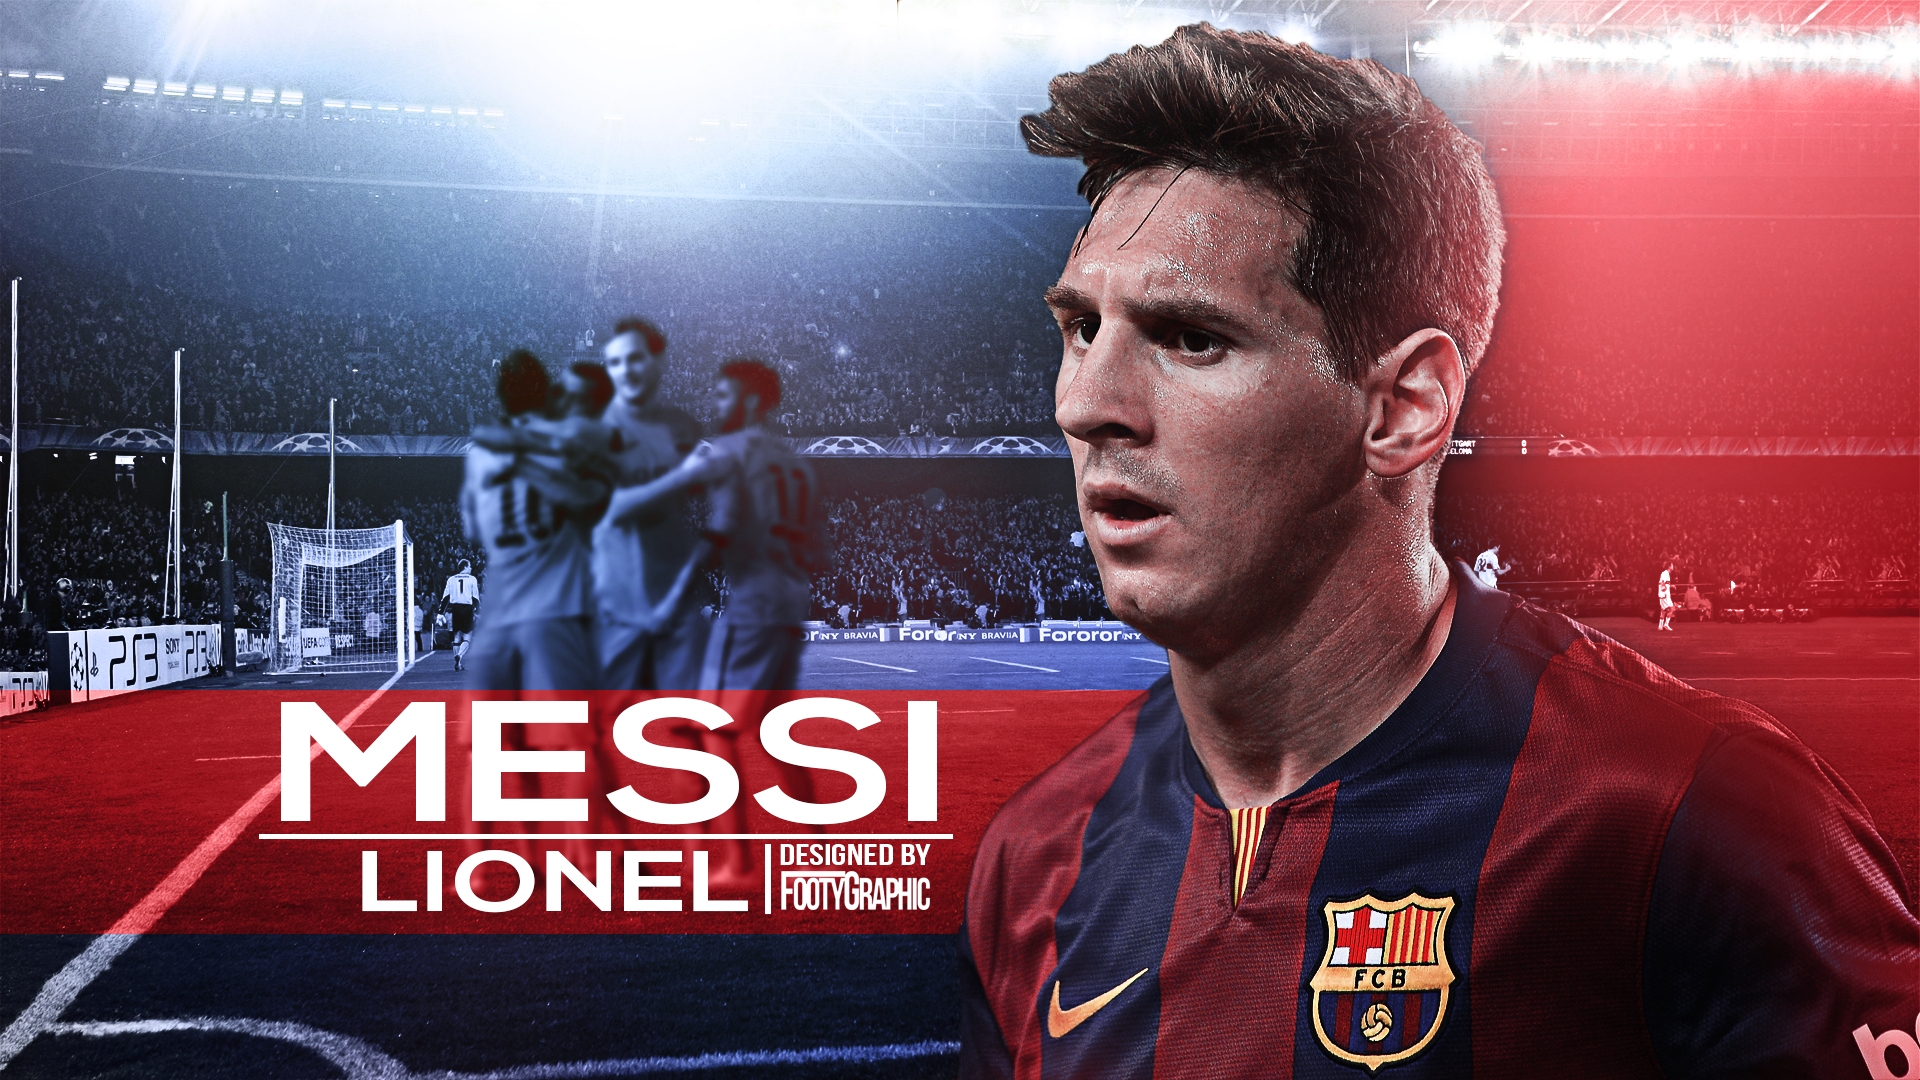 Lionel Messi Wallpapers HD download Wallpapers Backgrounds 1920x1080